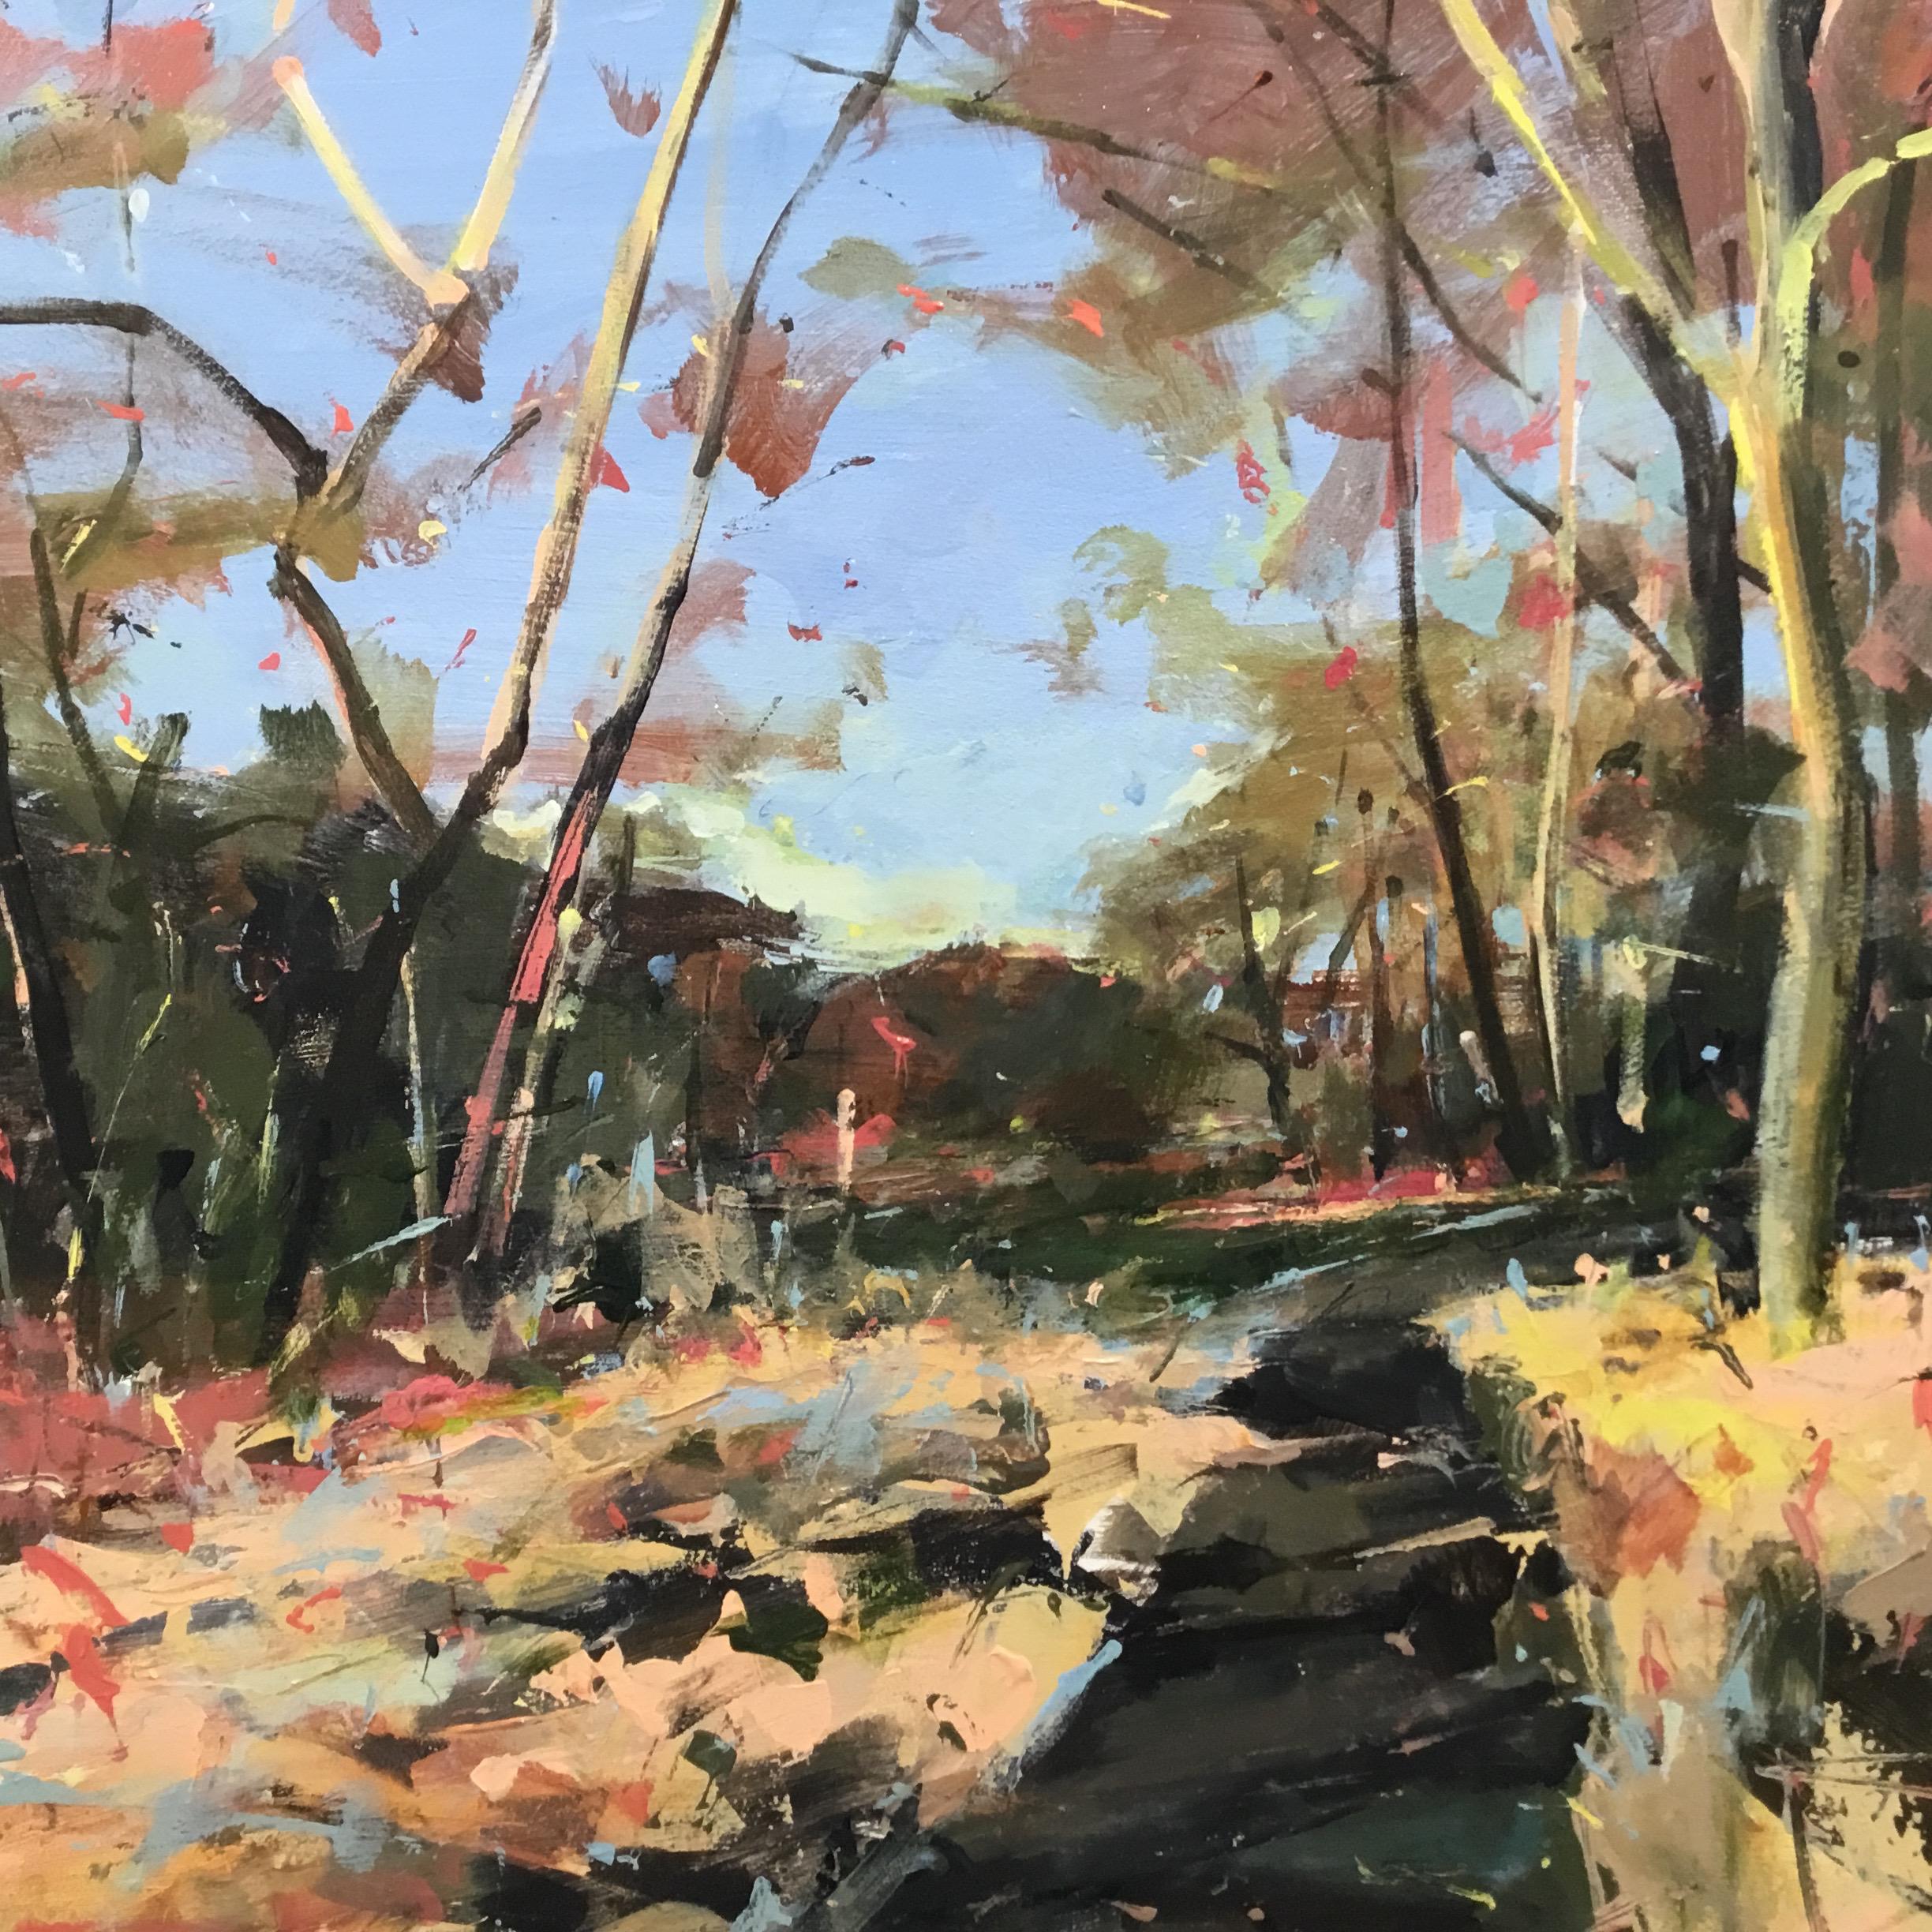 ‘You Are All I Need’ is an original landscape painting, impressionistic in style. It shows an autumnal path with pink, grey and ochre tones through Wimbledon Common in London. This is a place I love to walk. My paintings are about who you take with